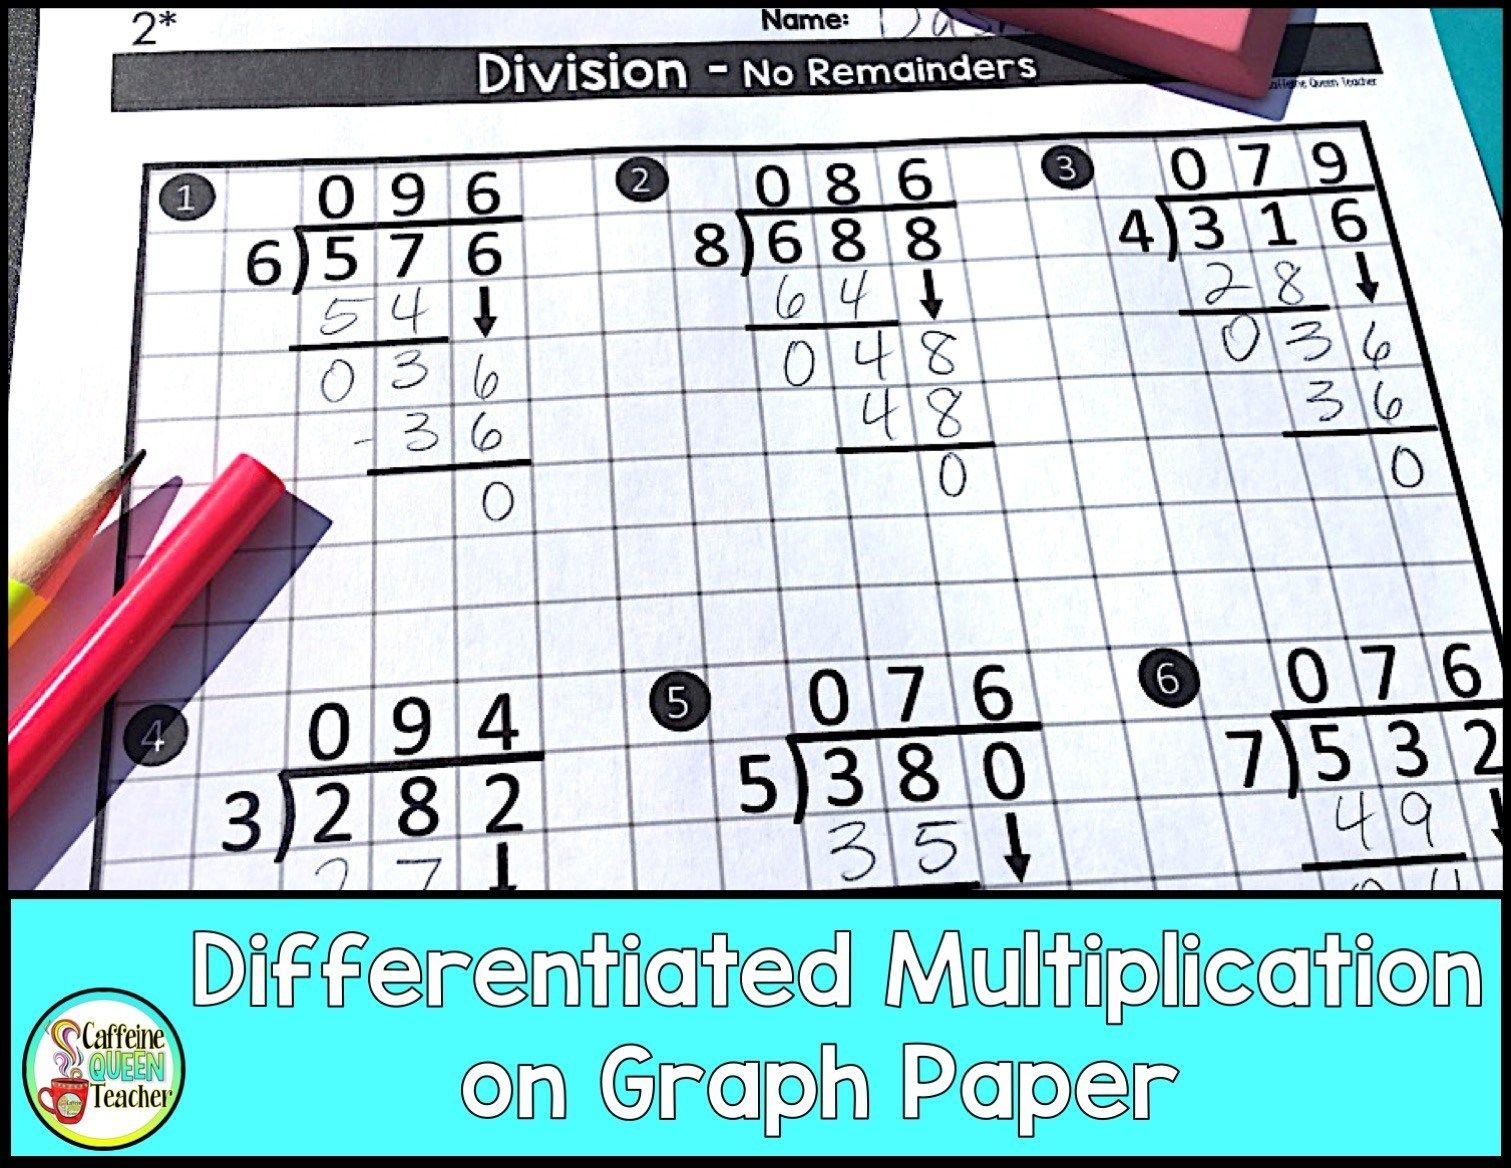 Differentiated Long Division Worksheets For FREE Caffeine Queen 